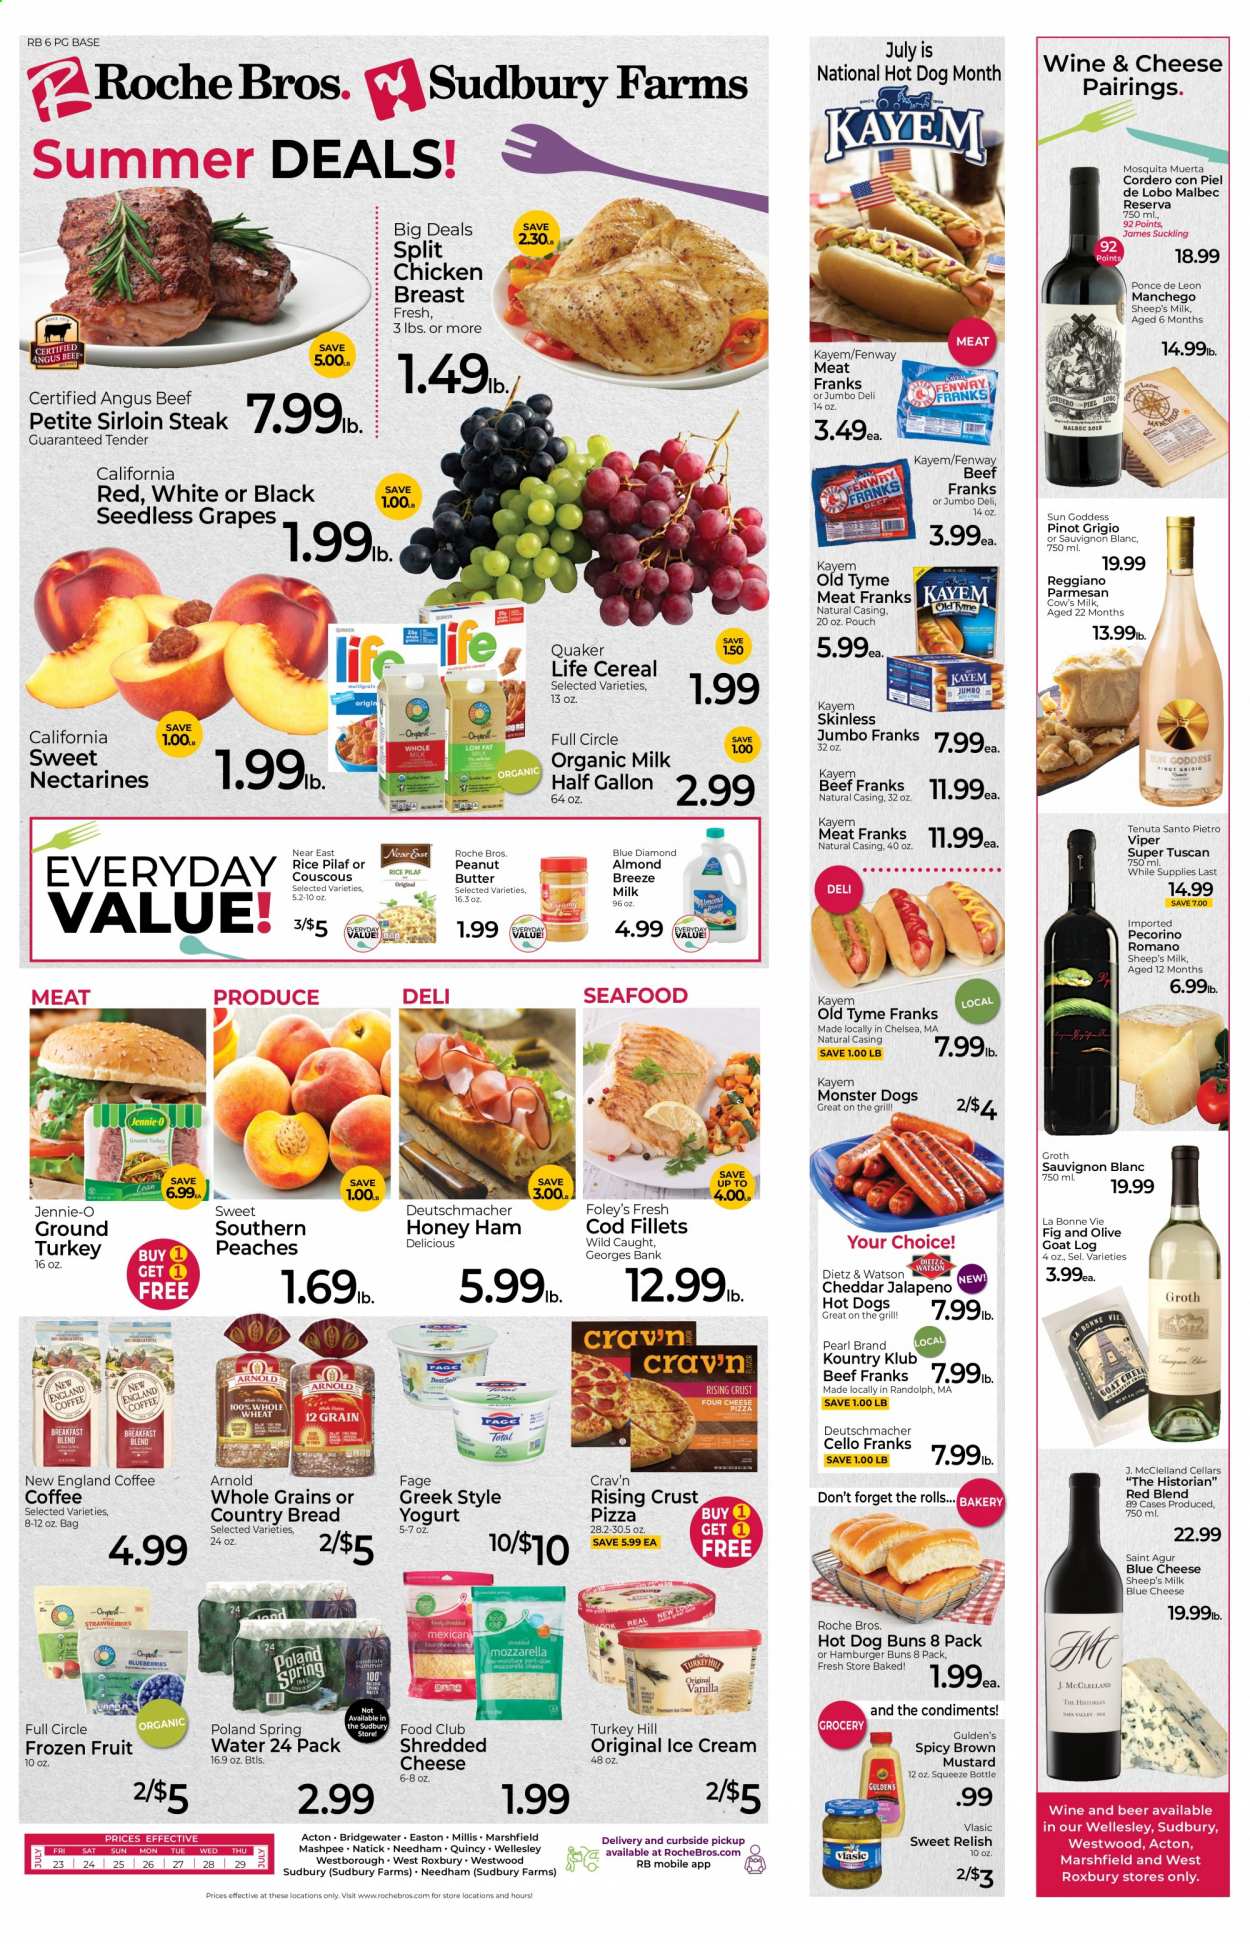 thumbnail - Roche Bros. Flyer - 07/23/2021 - 07/29/2021 - Sales products - seedless grapes, bread, buns, burger buns, jalapeño, grapes, cod, seafood, pizza, Quaker, ham, Dietz & Watson, blue cheese, Manchego, shredded cheese, cheddar, Pecorino, yoghurt, organic milk, Almond Breeze, ice cream, cereals, couscous, rice, mustard, peanut butter, Blue Diamond, Monster, spring water, coffee, red wine, white wine, wine, Pinot Grigio, Sauvignon Blanc, beer, ground turkey, beef meat, beef sirloin, steak, sirloin steak, nectarines, peaches. Page 1.